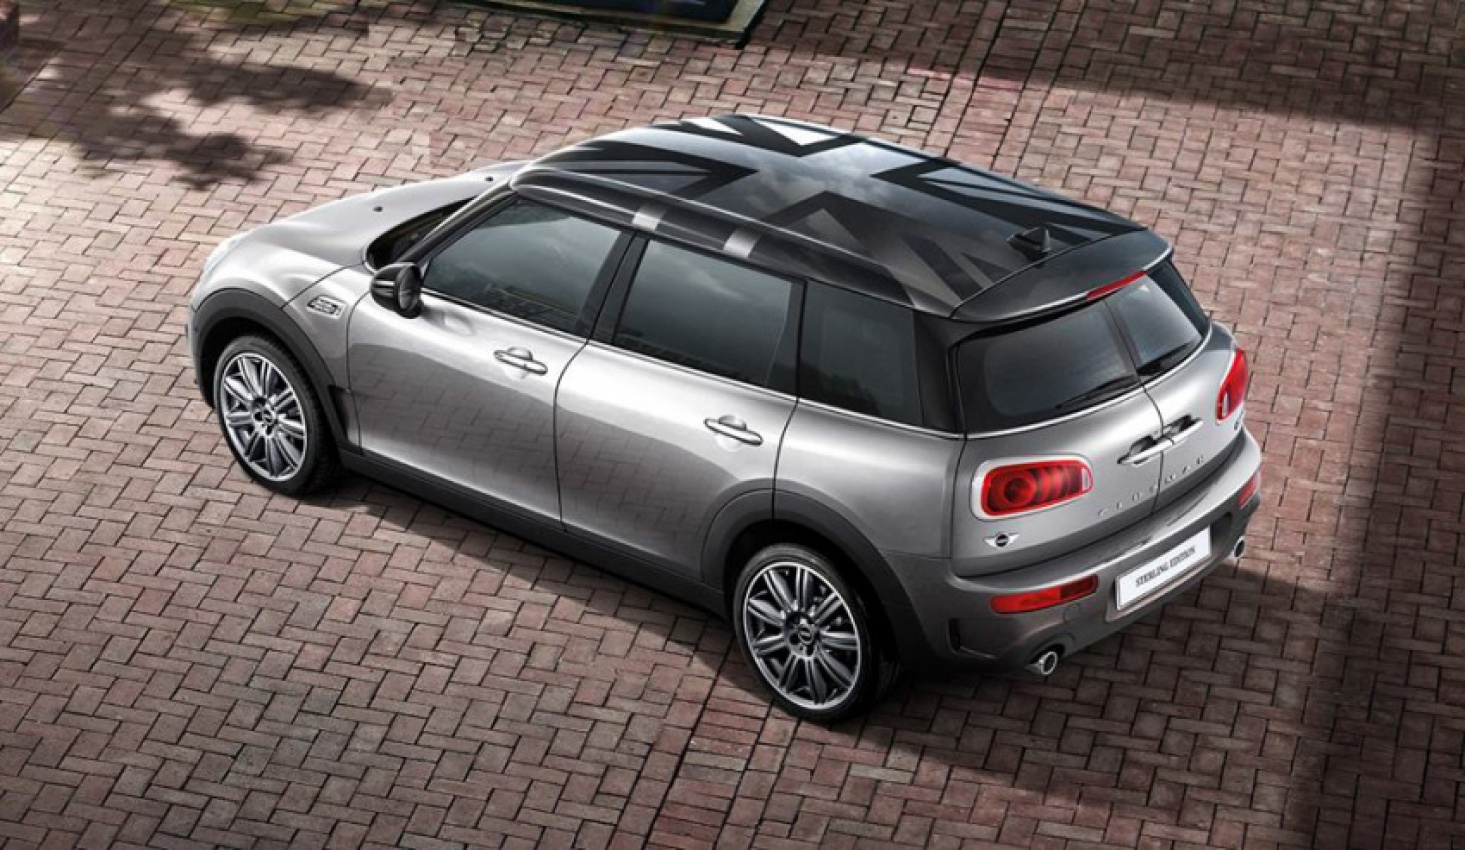 autos, car brands, cars, mini, sterling, mini clubman, mini clubman sterling edition limited to 20 units